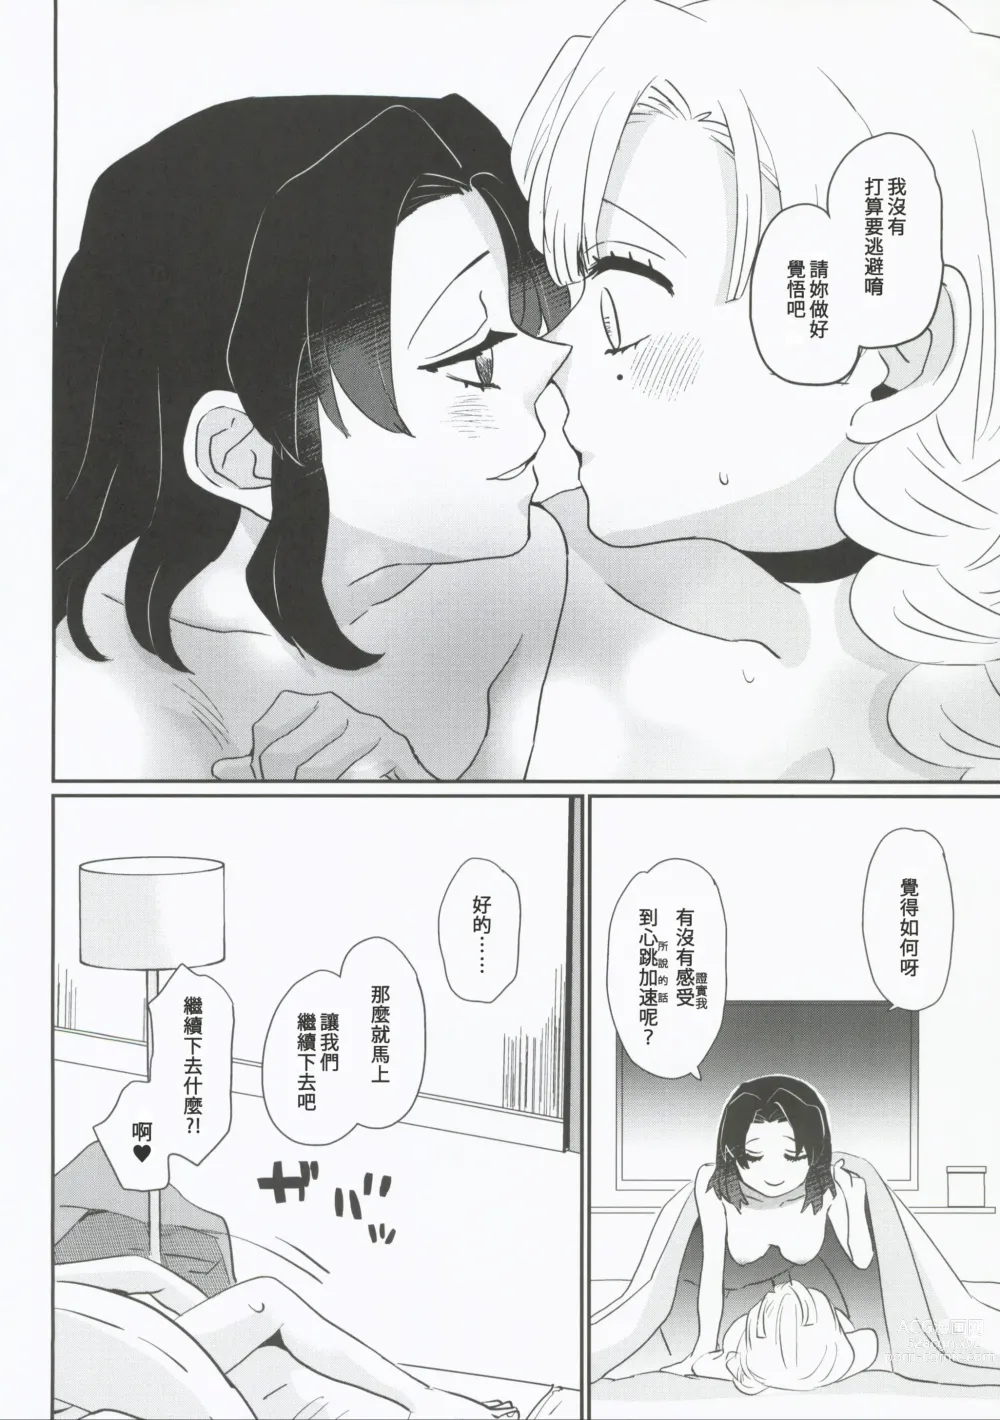 Page 45 of doujinshi 屬於妳的Omega